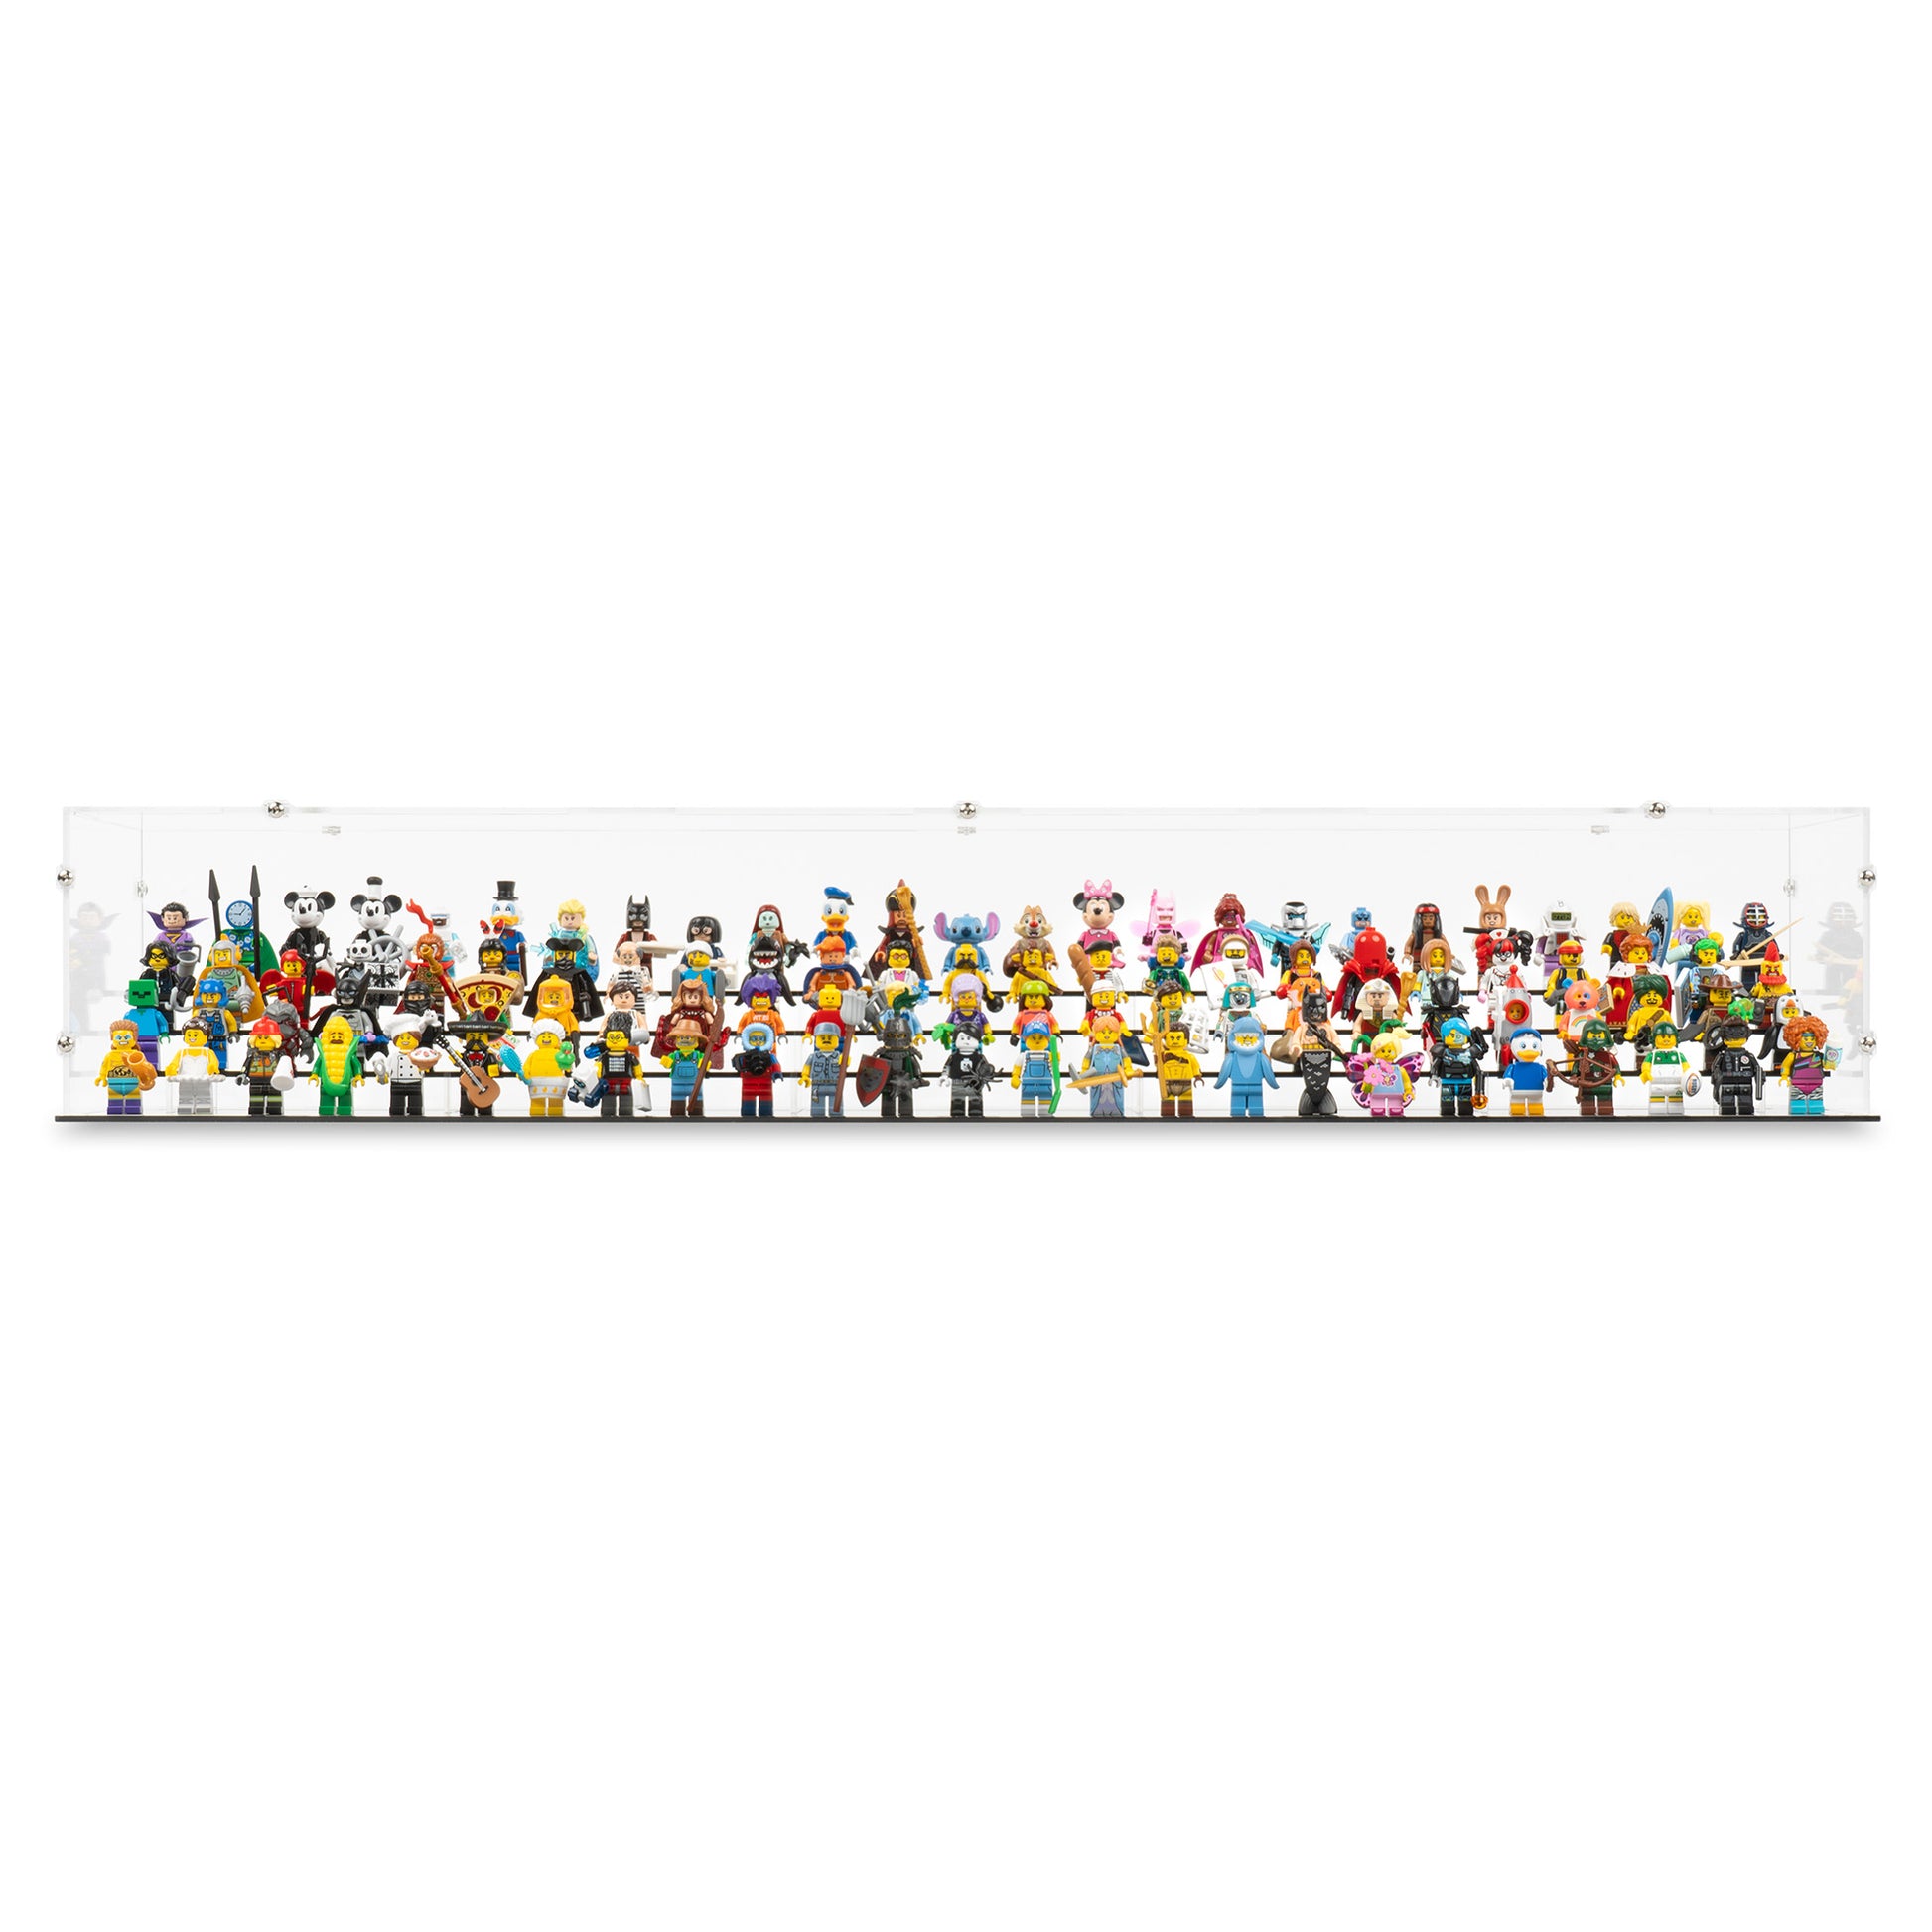 Front view of 100 LEGO Minifigures Display Case.